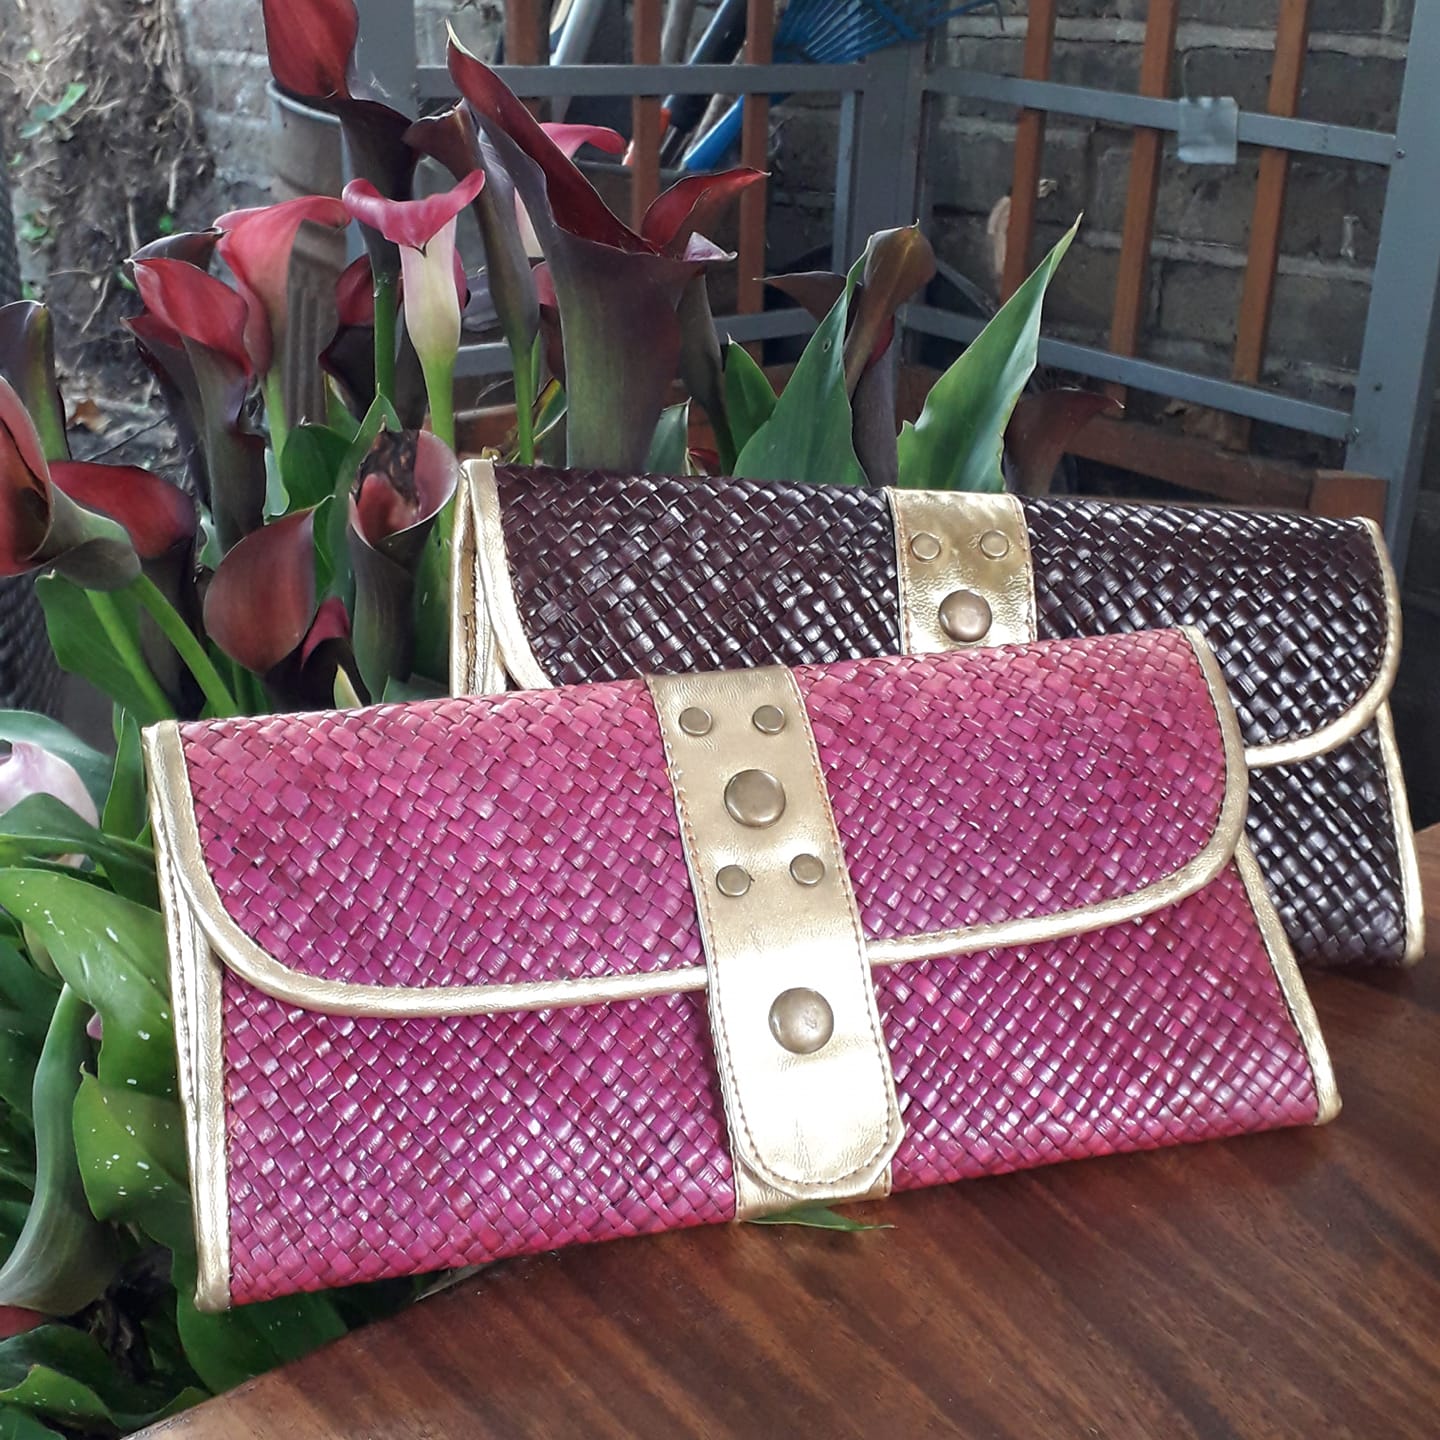 Handmade purses in pink and dark colours